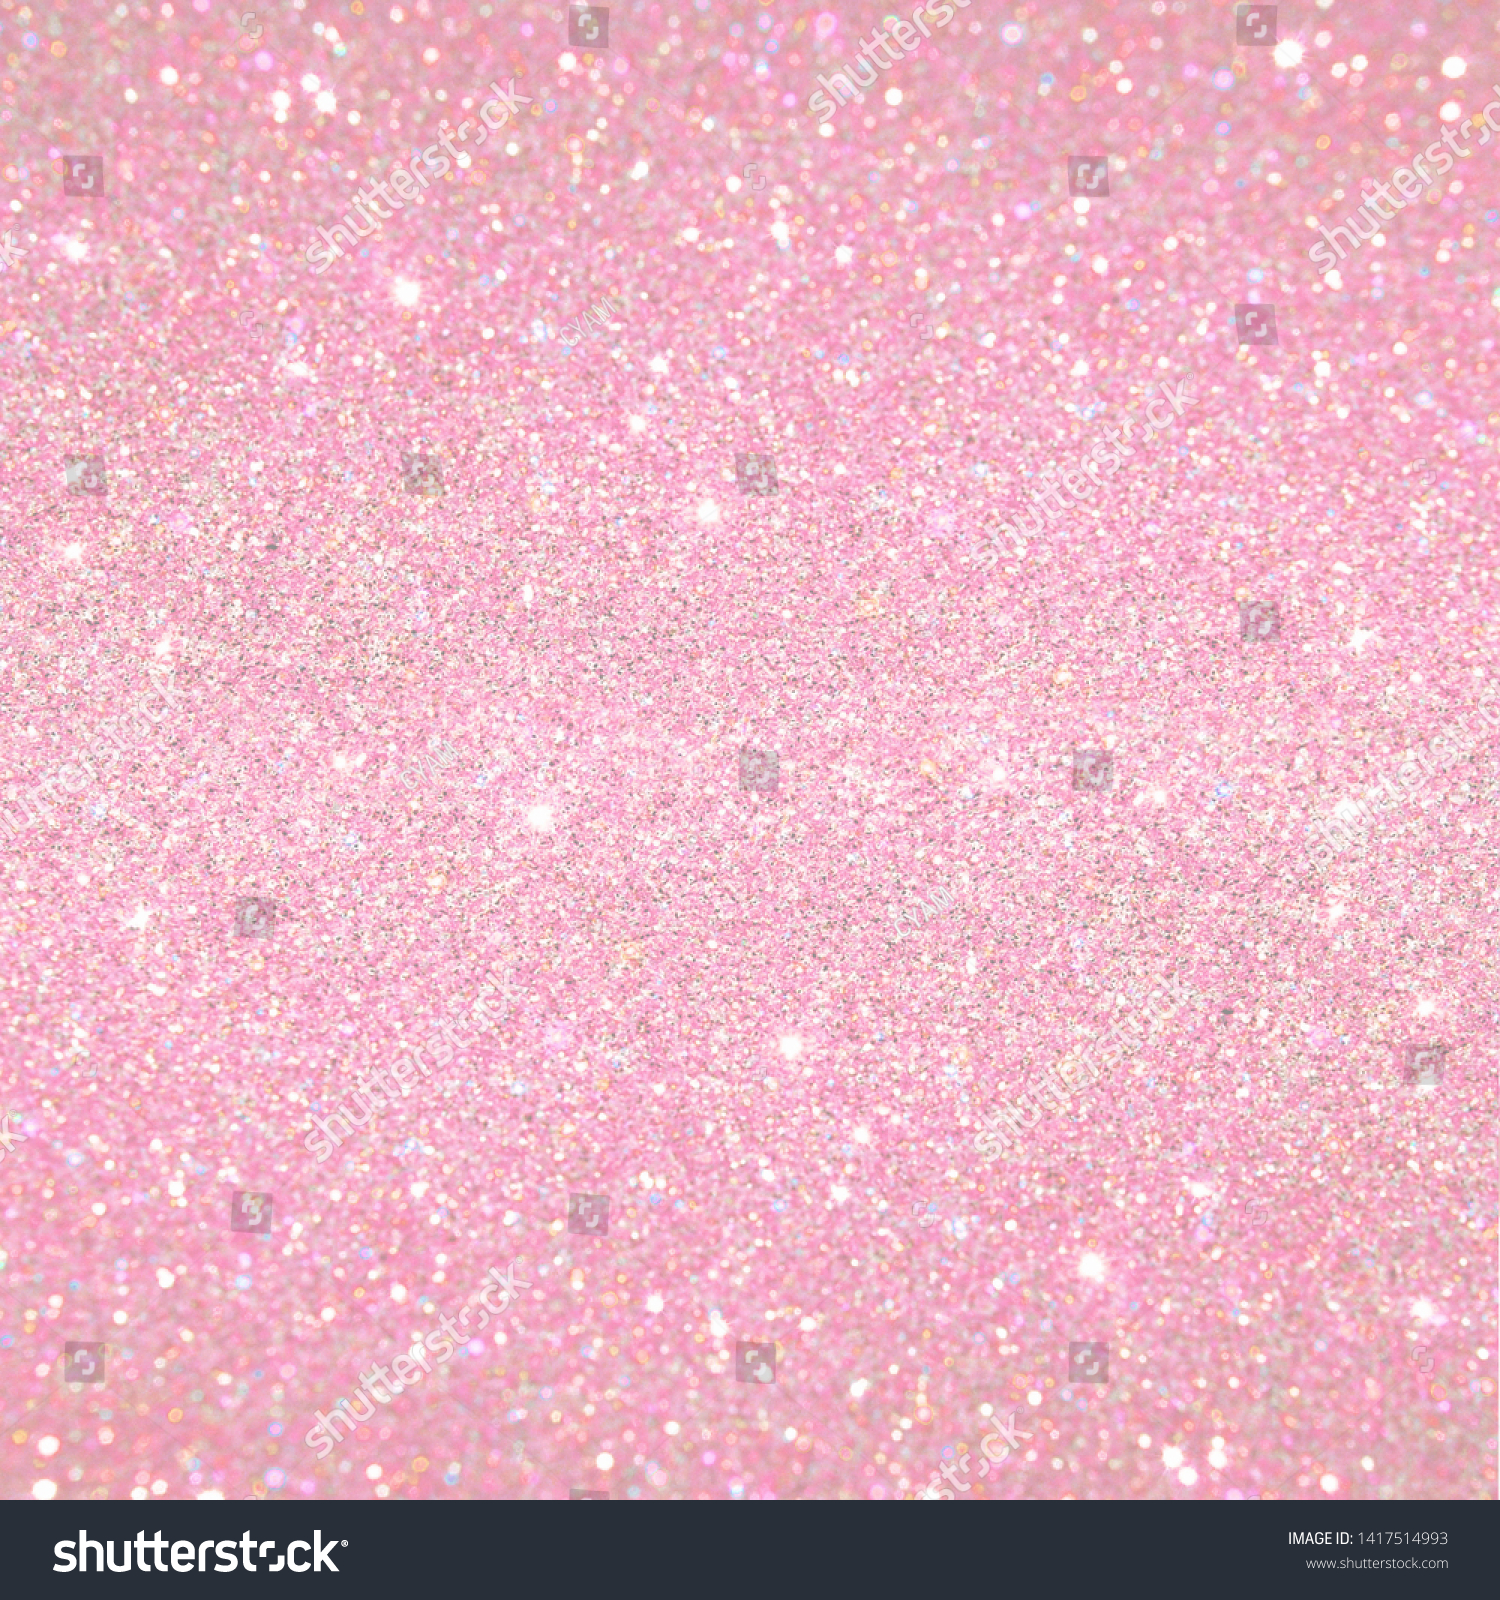 92,399 Shimmer pink Images, Stock Photos & Vectors | Shutterstock